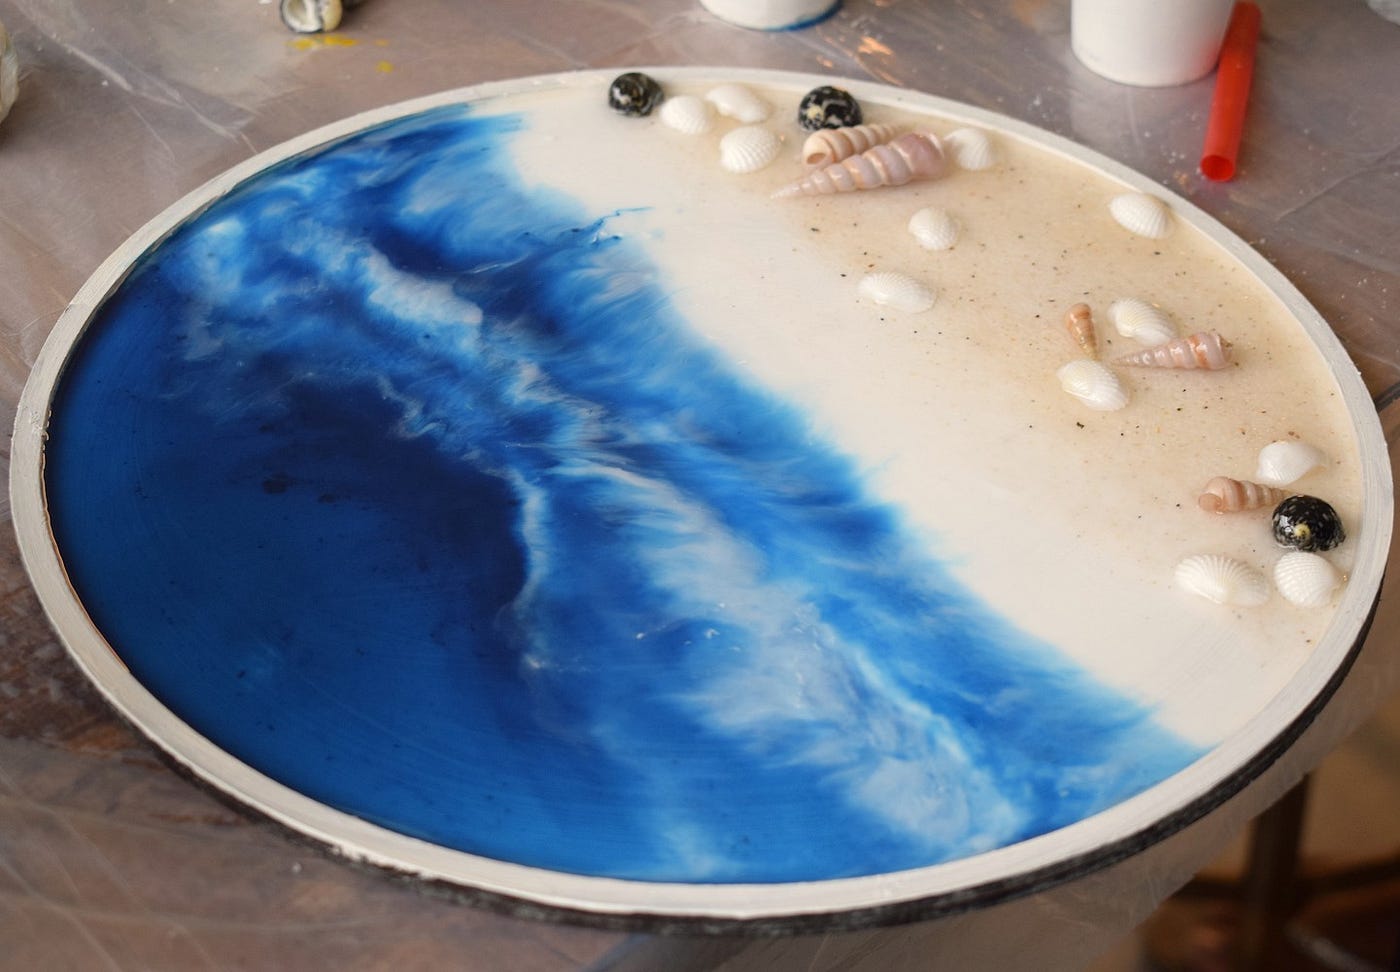 Everything You Need To Know About Resin Art